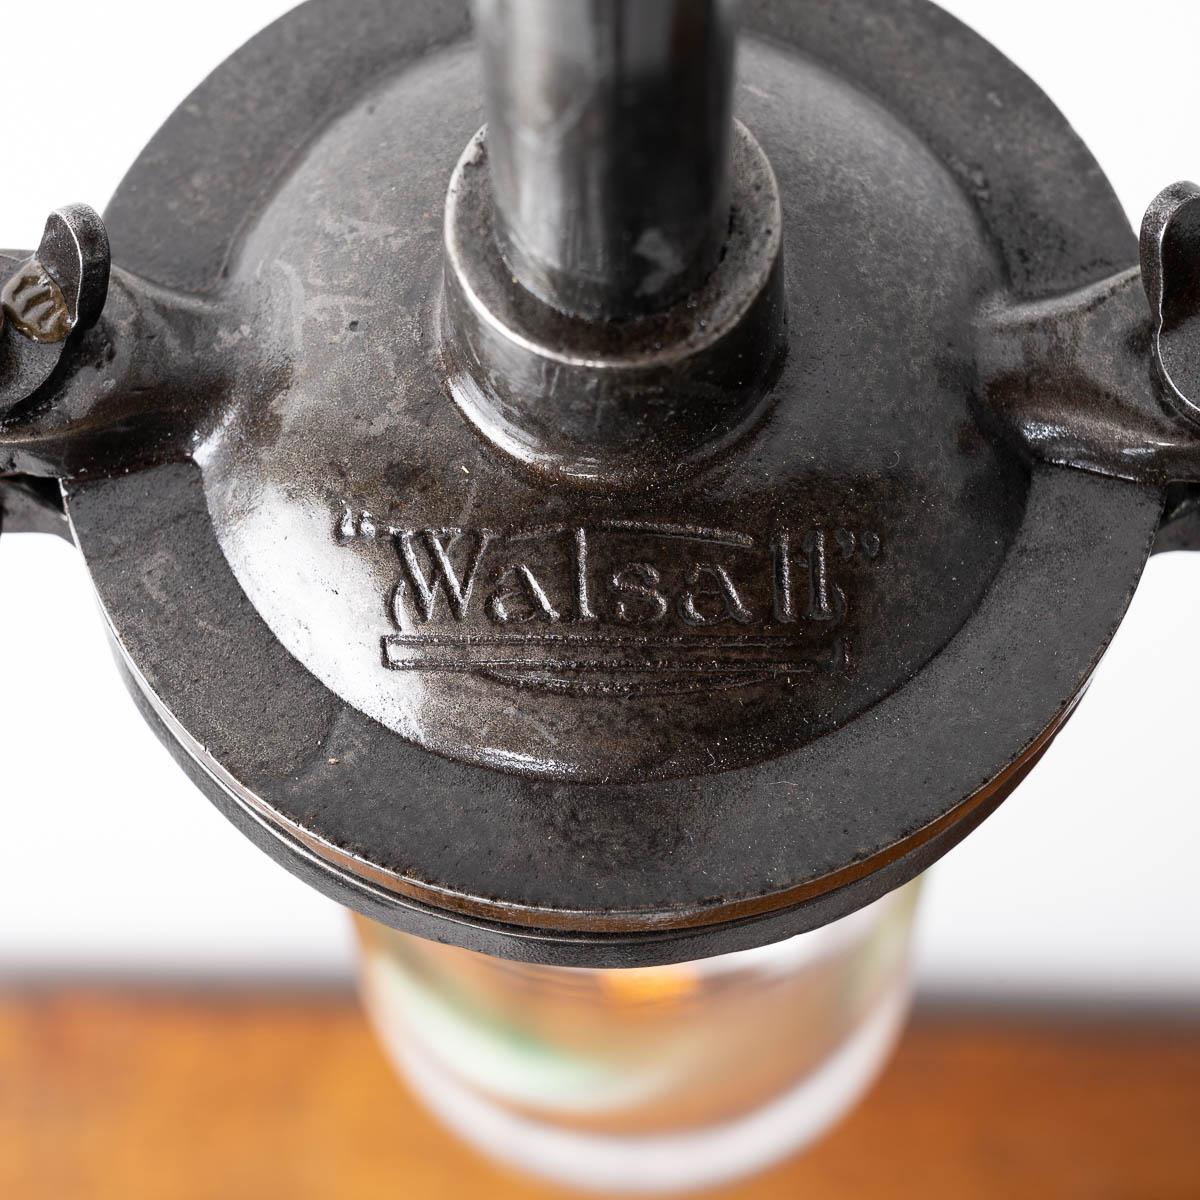 Industrial Reclaimed Vintage Well Glass Wall Light Fittings by Walsall Conduits Ltd For Sale